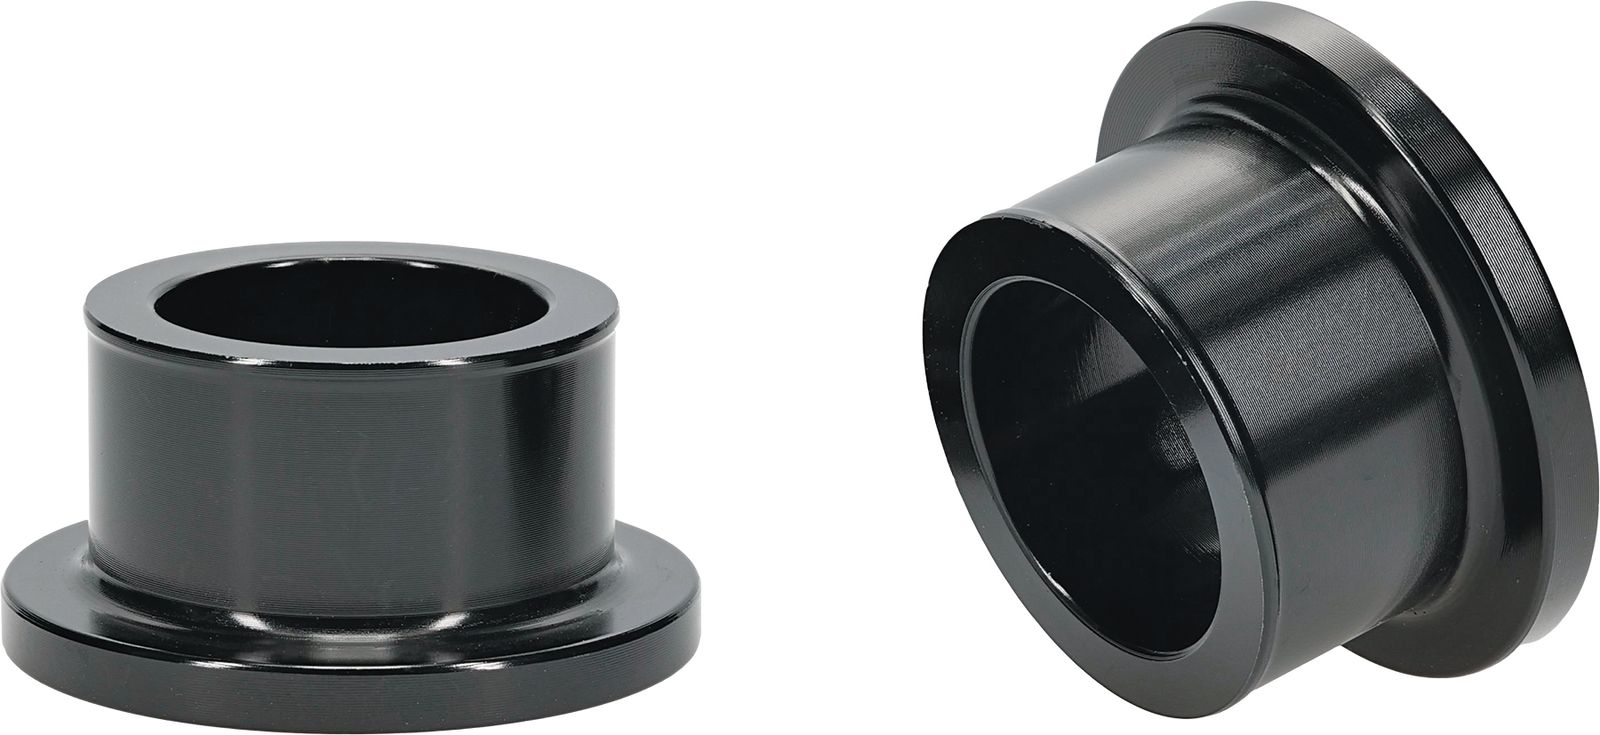 Wrp Rear Wheel Spacer Kits - WRP111080-1 image